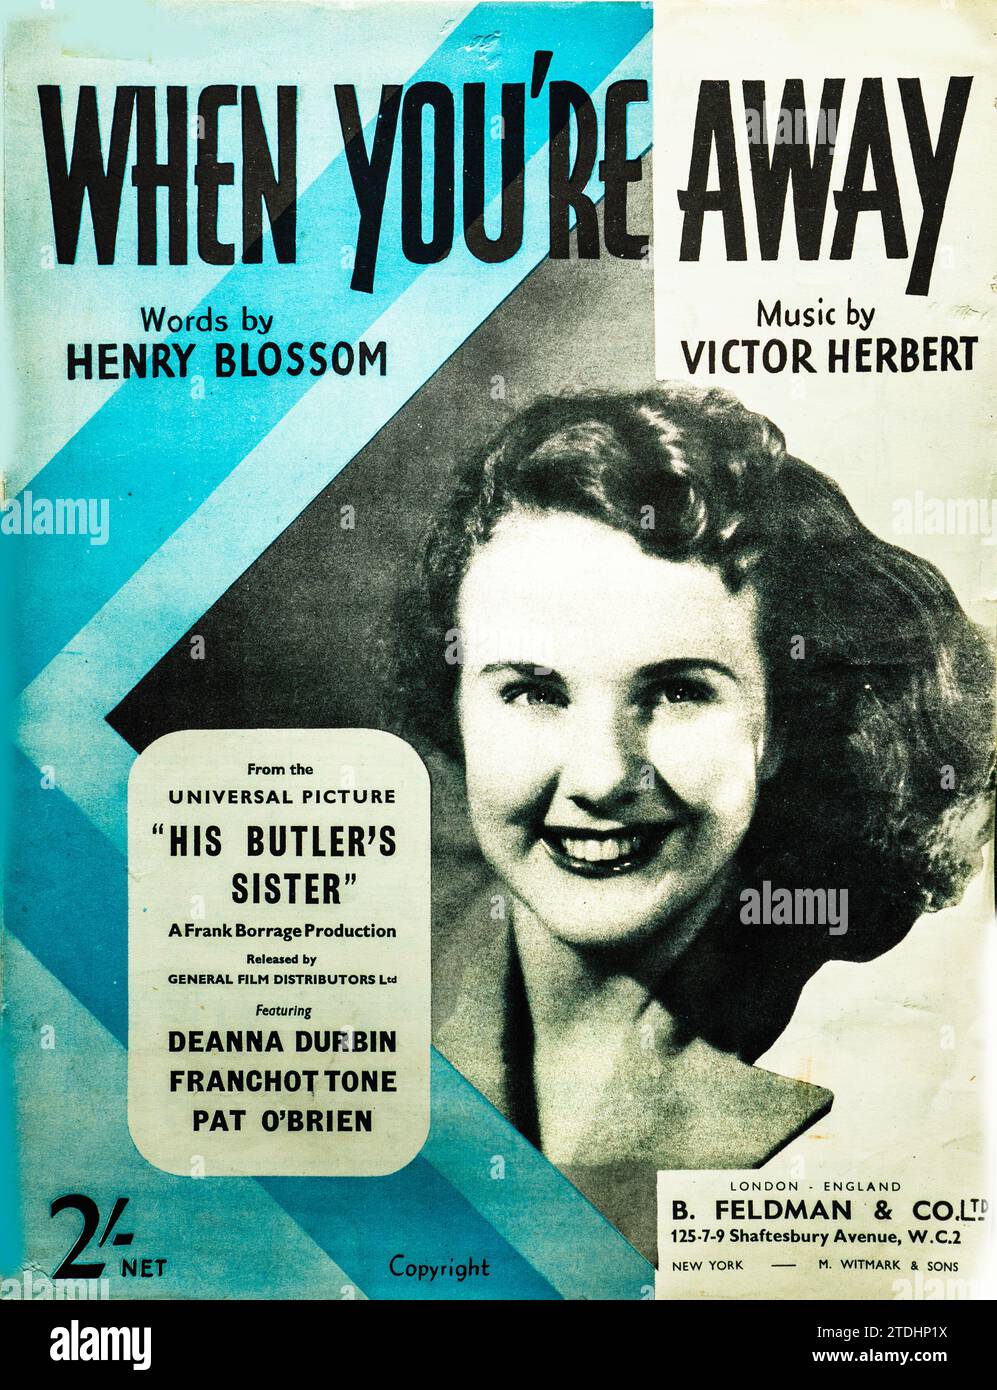 Vintage 1940s sheet music cover for 'When You’re Away', words by Henry blossom, music by Victor Herbert from the film His Butler’s Sister. Stock Photo